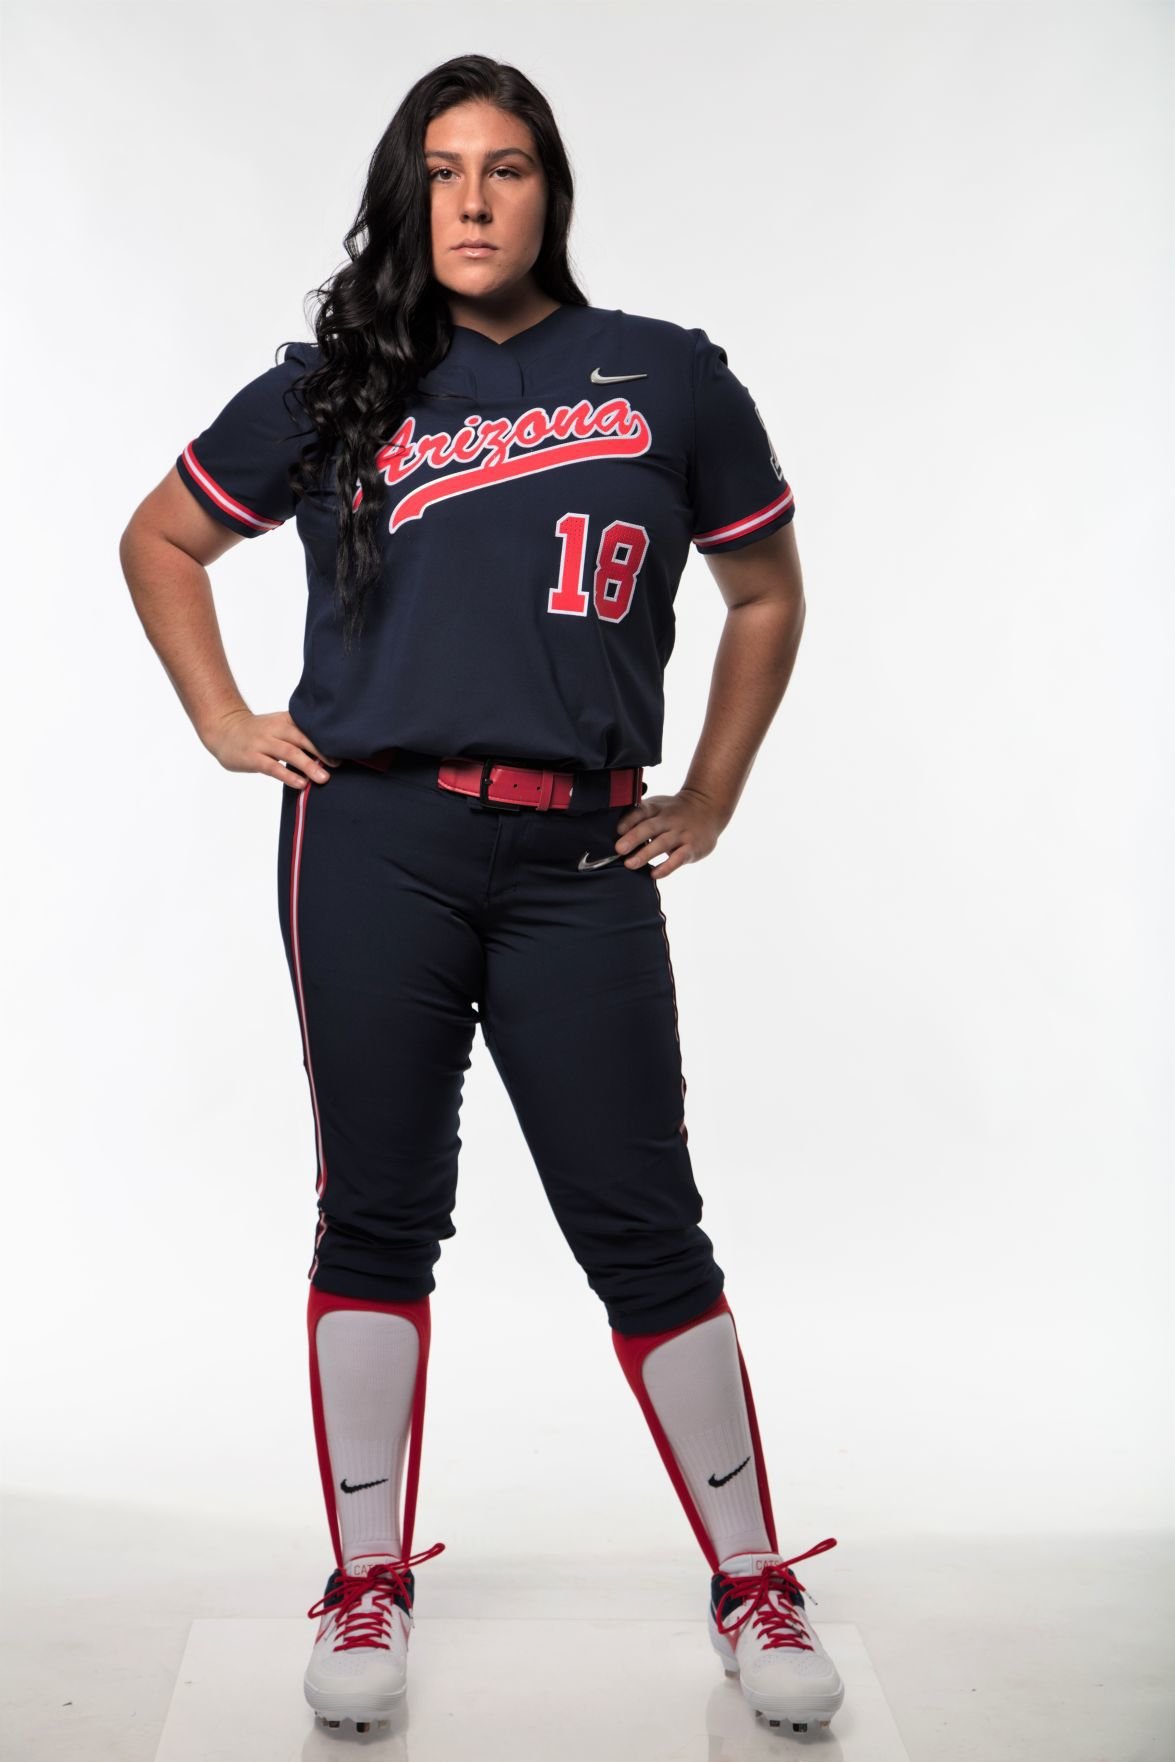 red white and blue softball uniforms